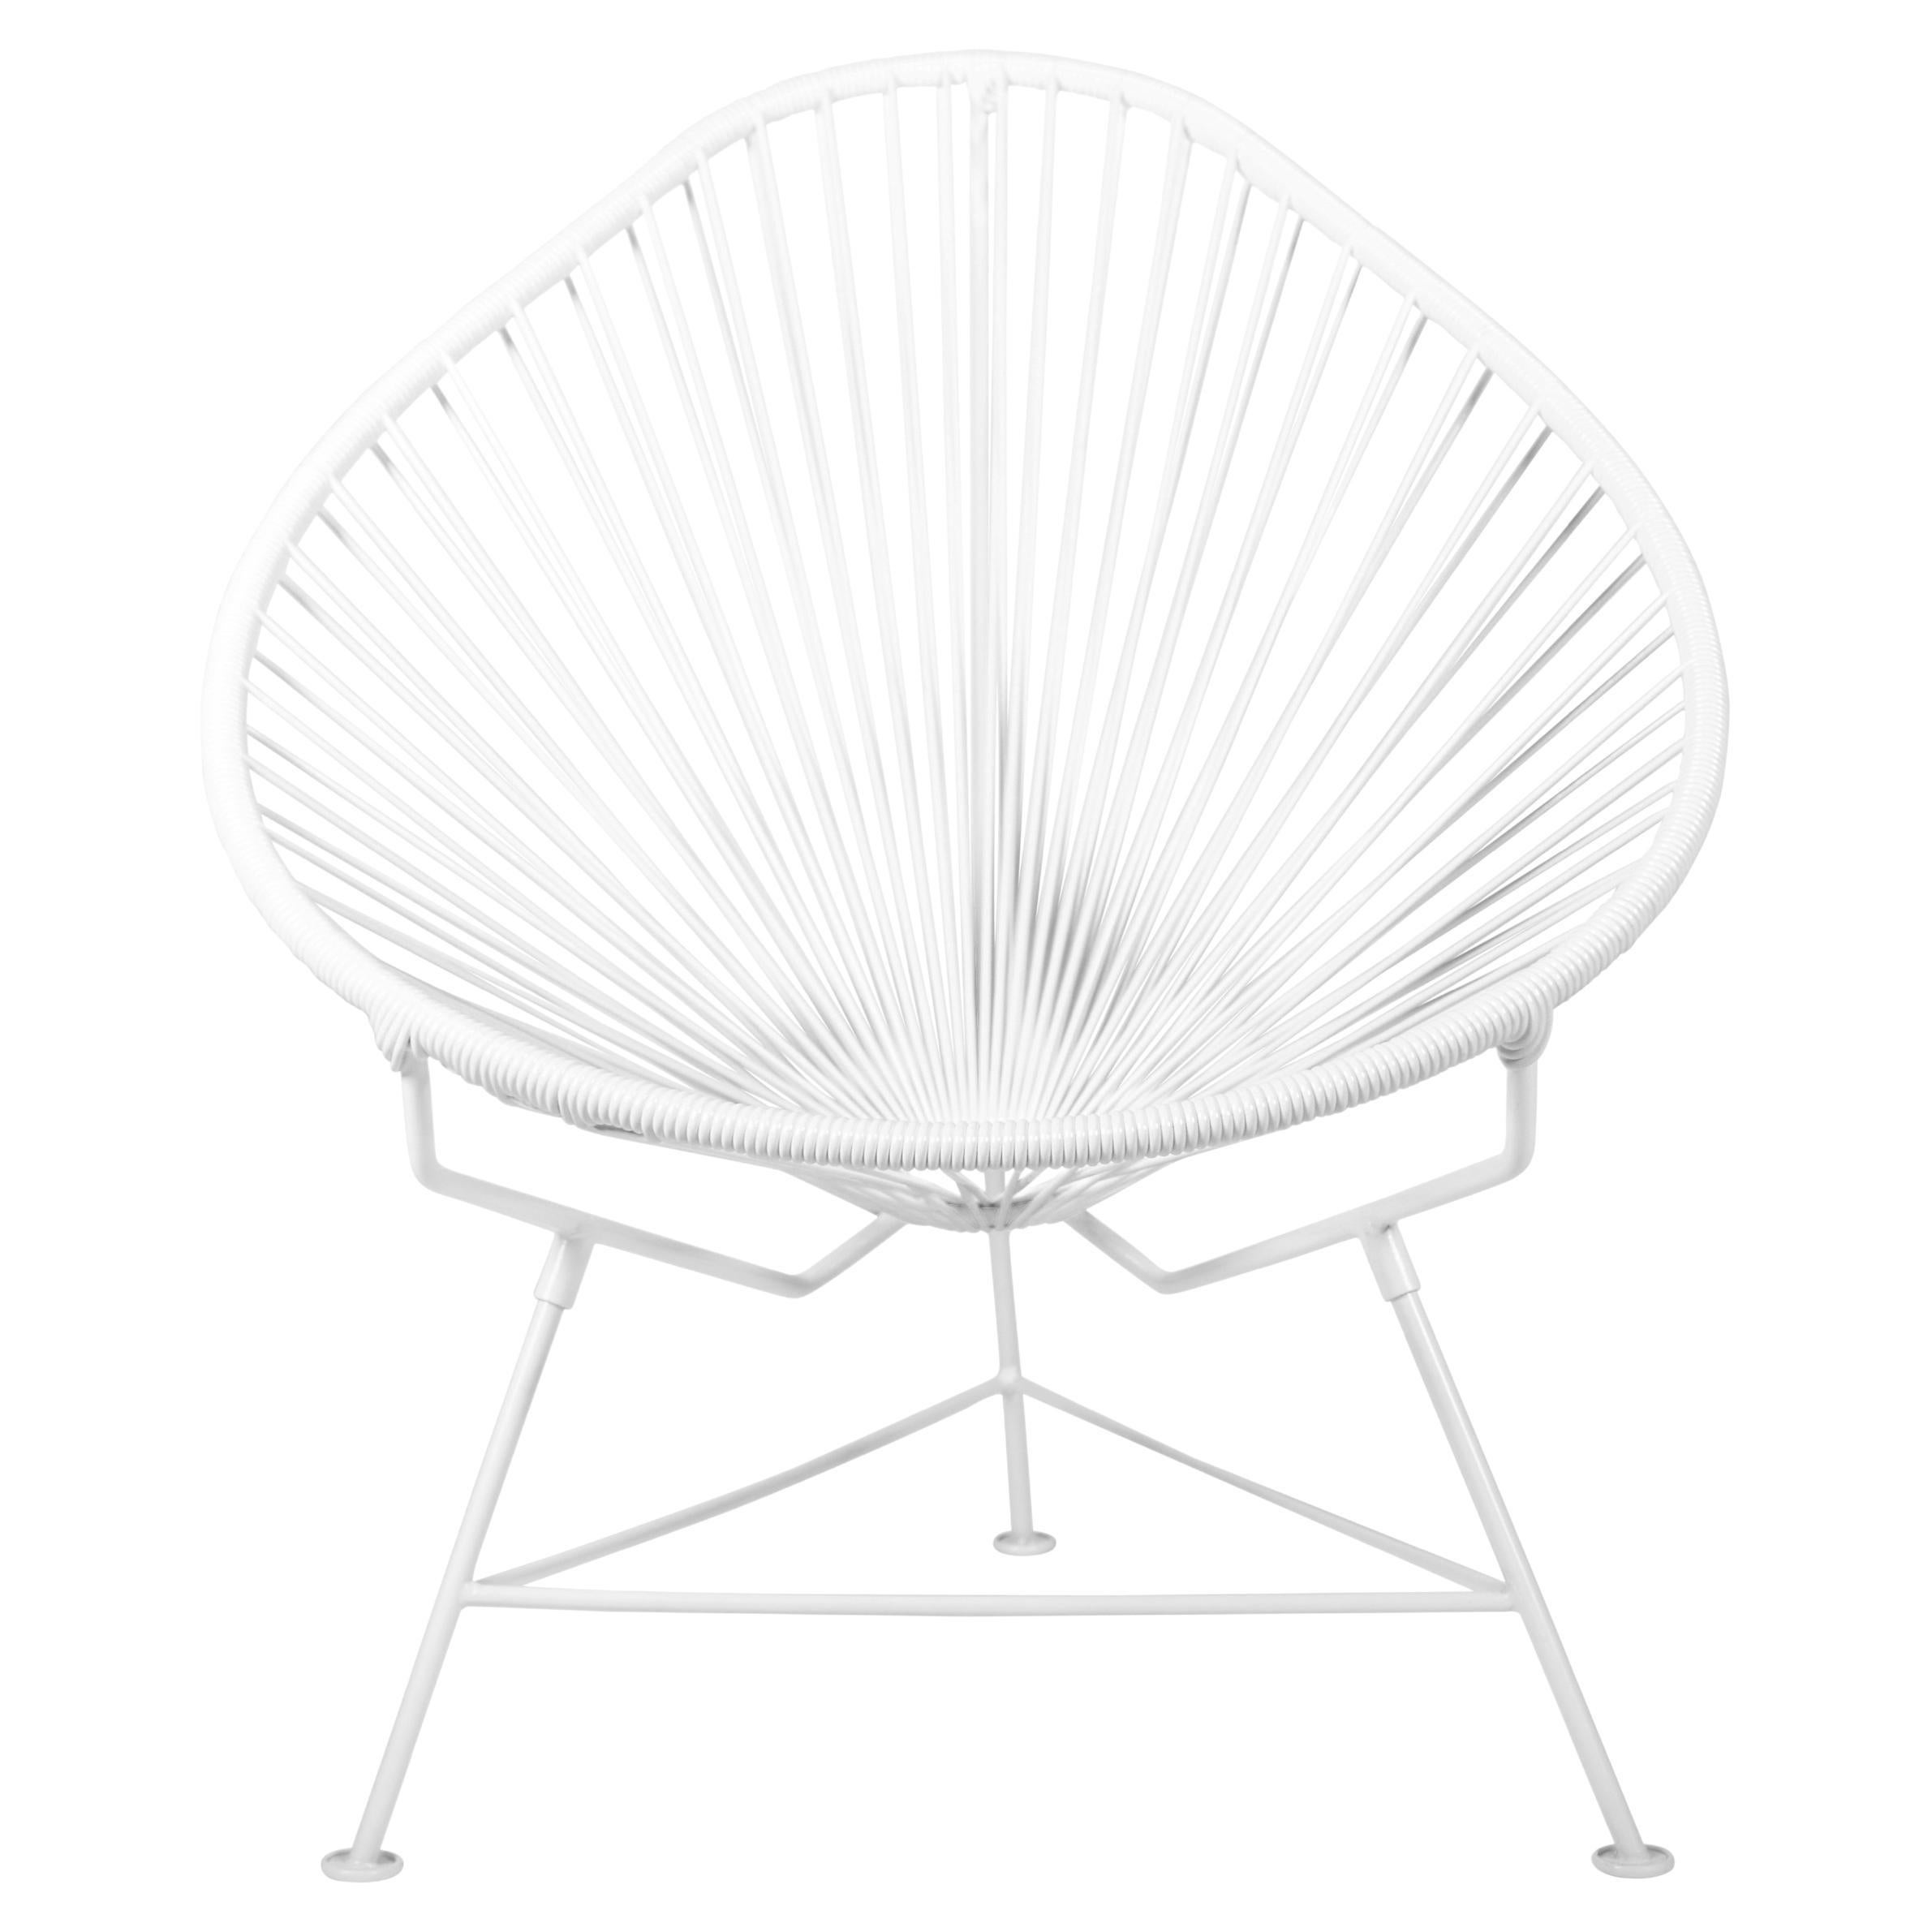 Innit Designs Acapulco Chair White Weave on White Frame